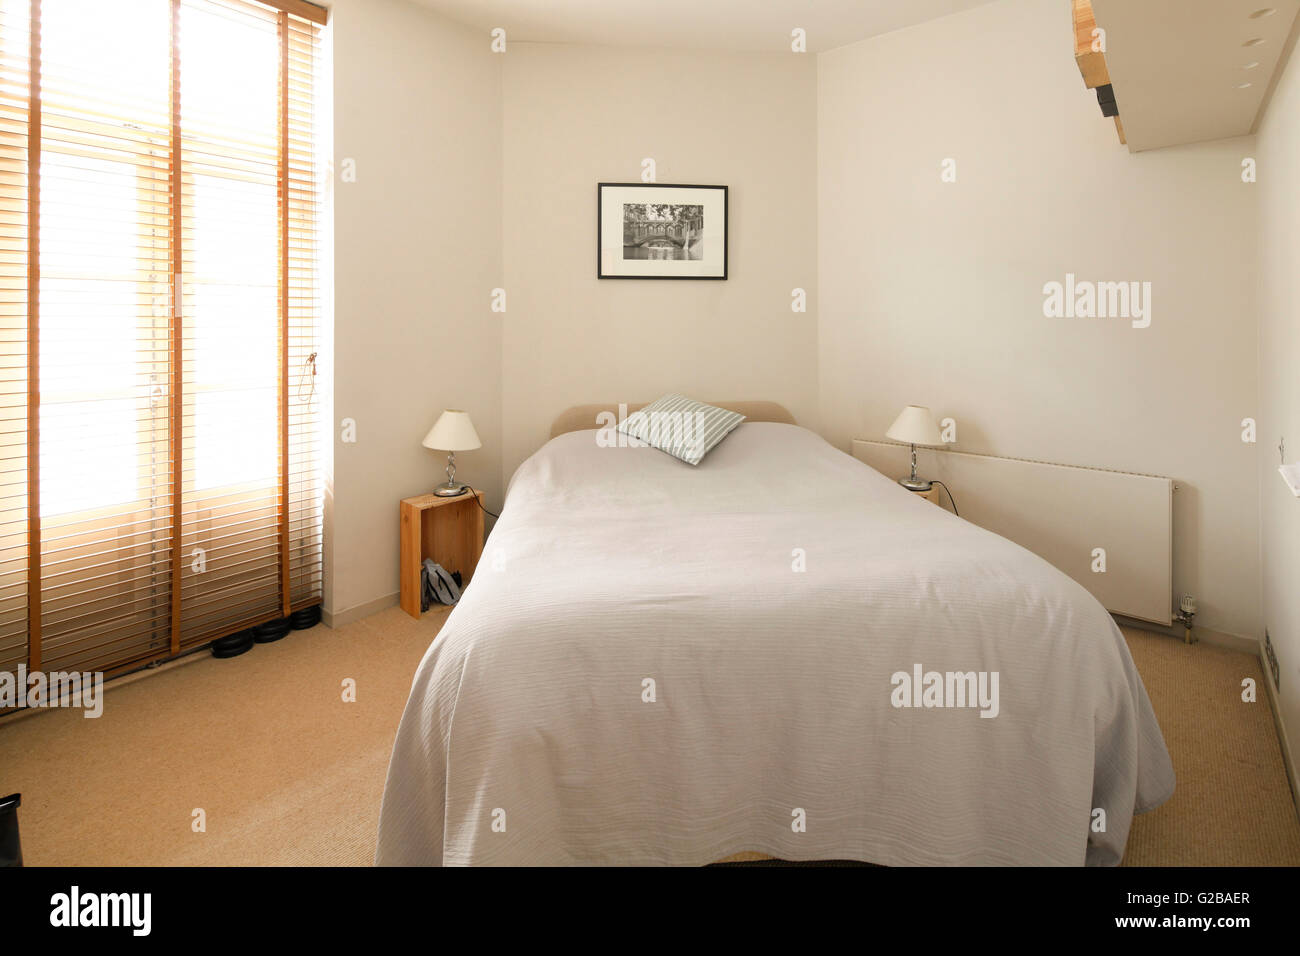 Foley House, Maddox Street. Small bedroom with white bedding and minimal furniture. Stock Photo